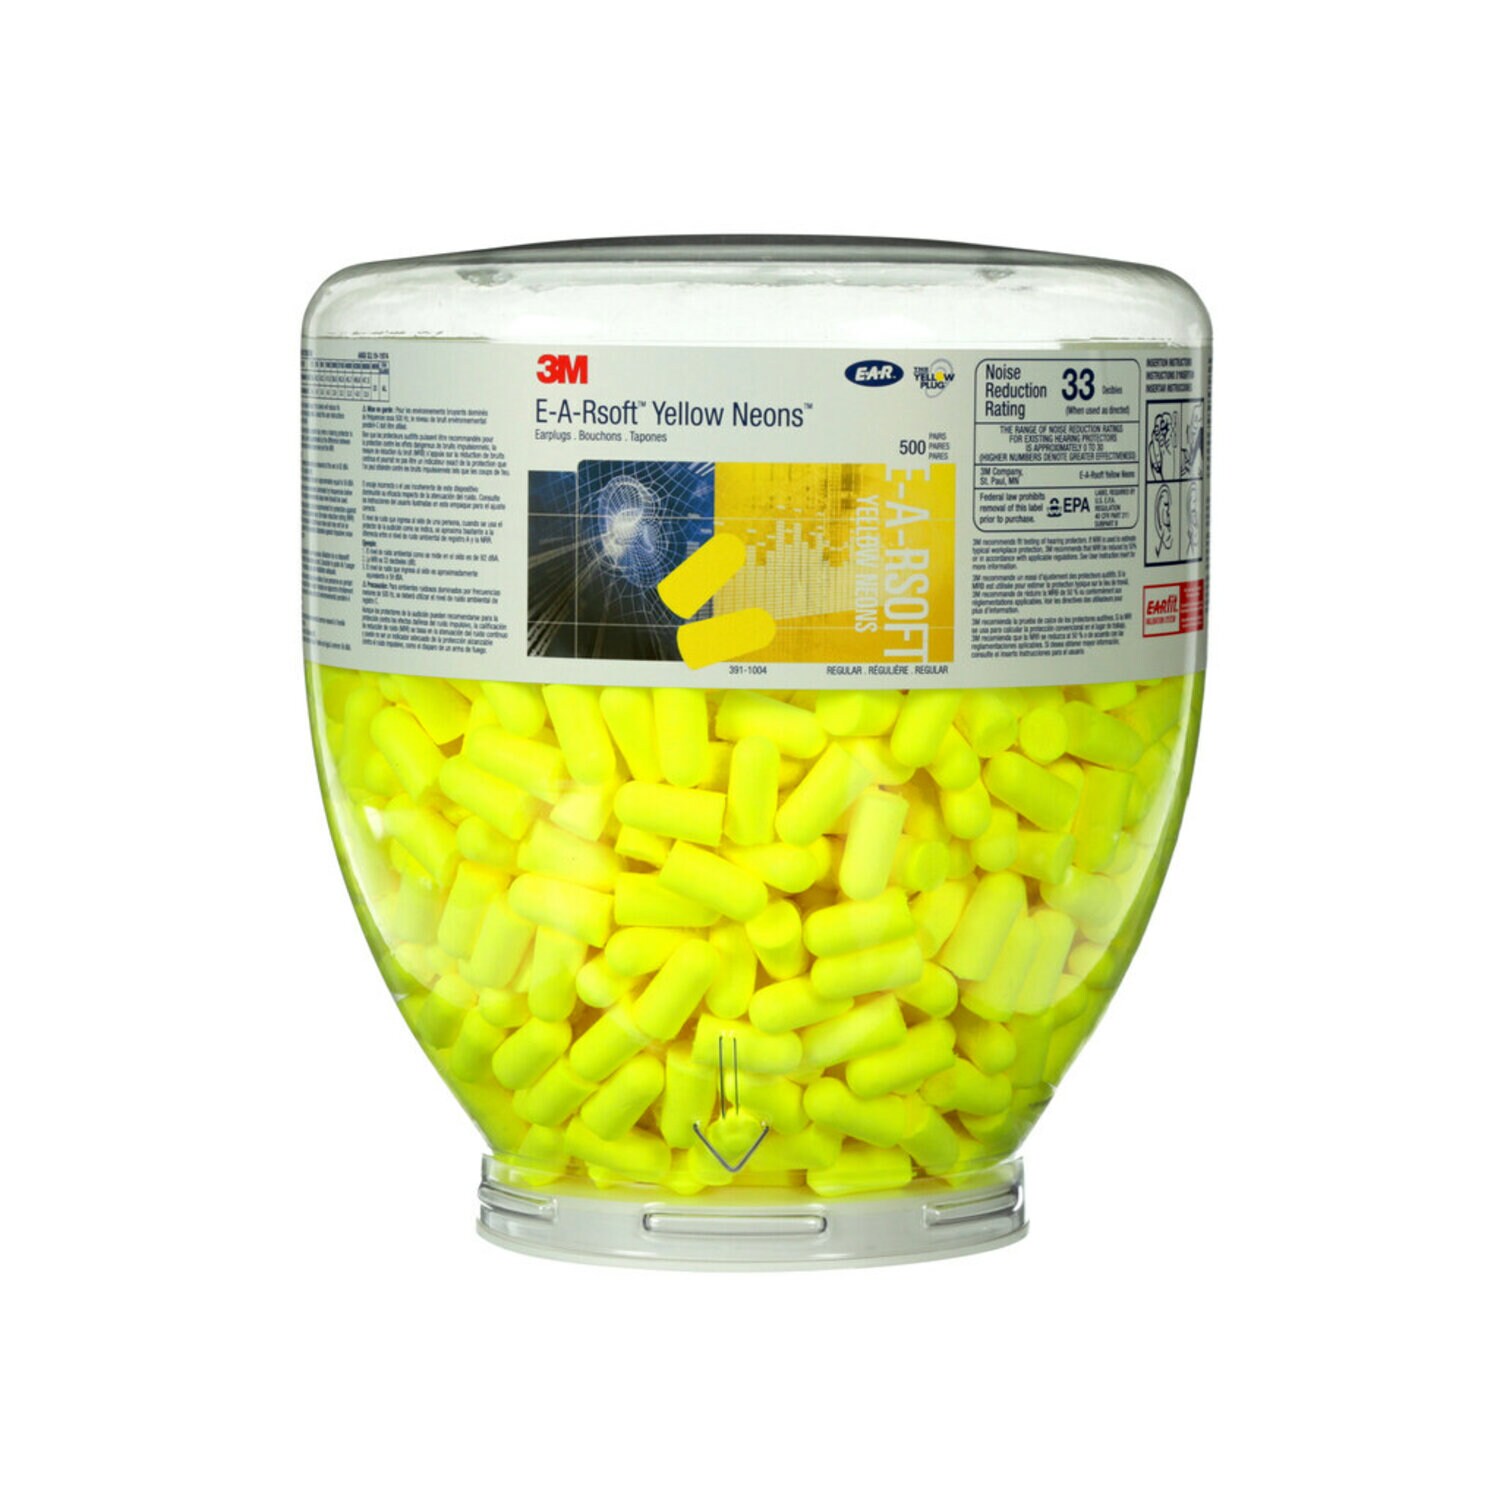 7000002305 - 3M E-A-Rsoft Yellow Neons One Touch Refill Earplugs 391-1004,
Uncorded, Regular Size, 2000 Pair/Case